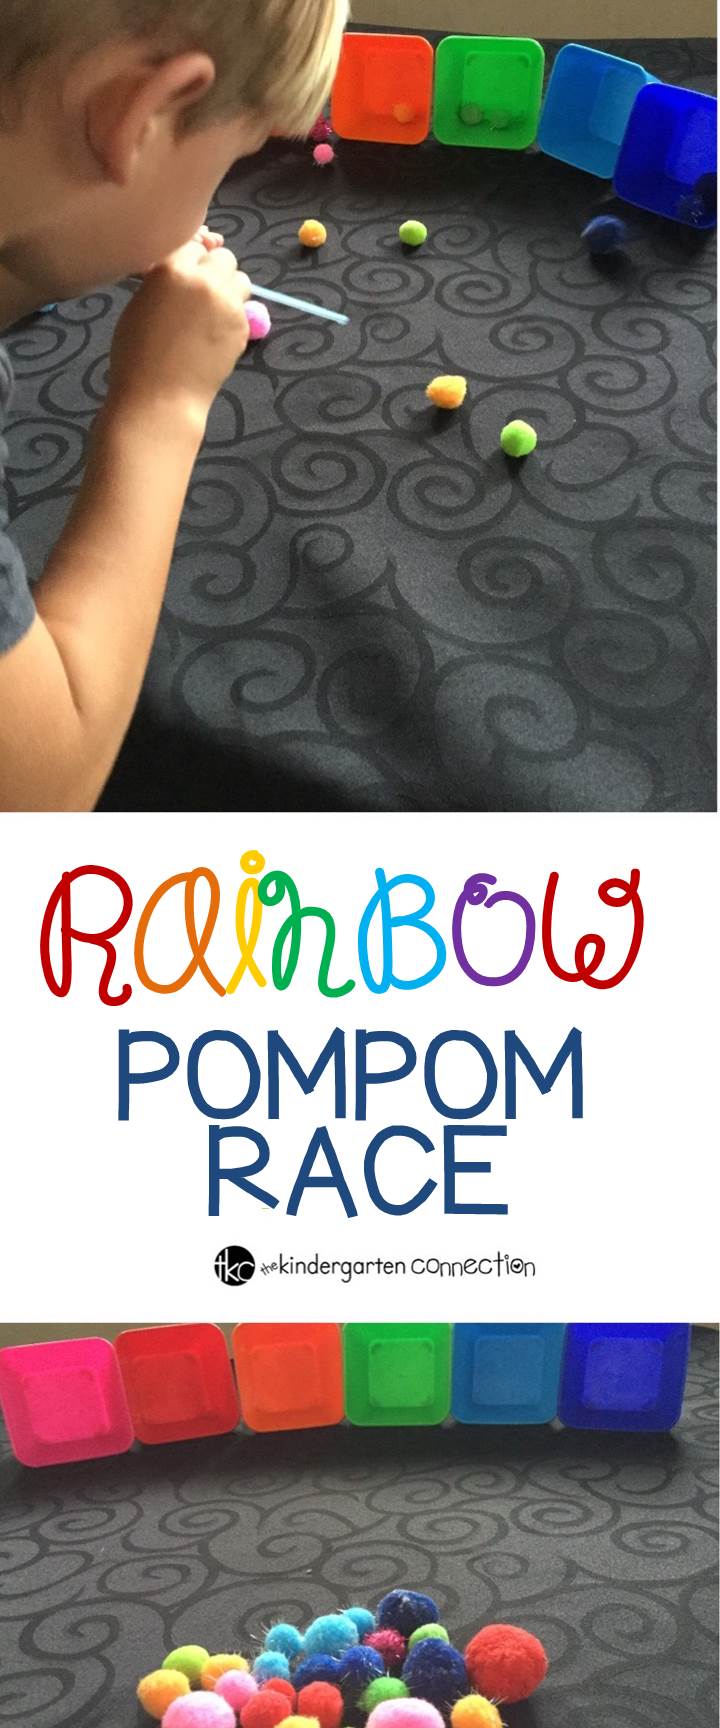 Today I am sharing this colorful and fun activity we call rainbow pompom race! Practice color recognition and fine motor skills.